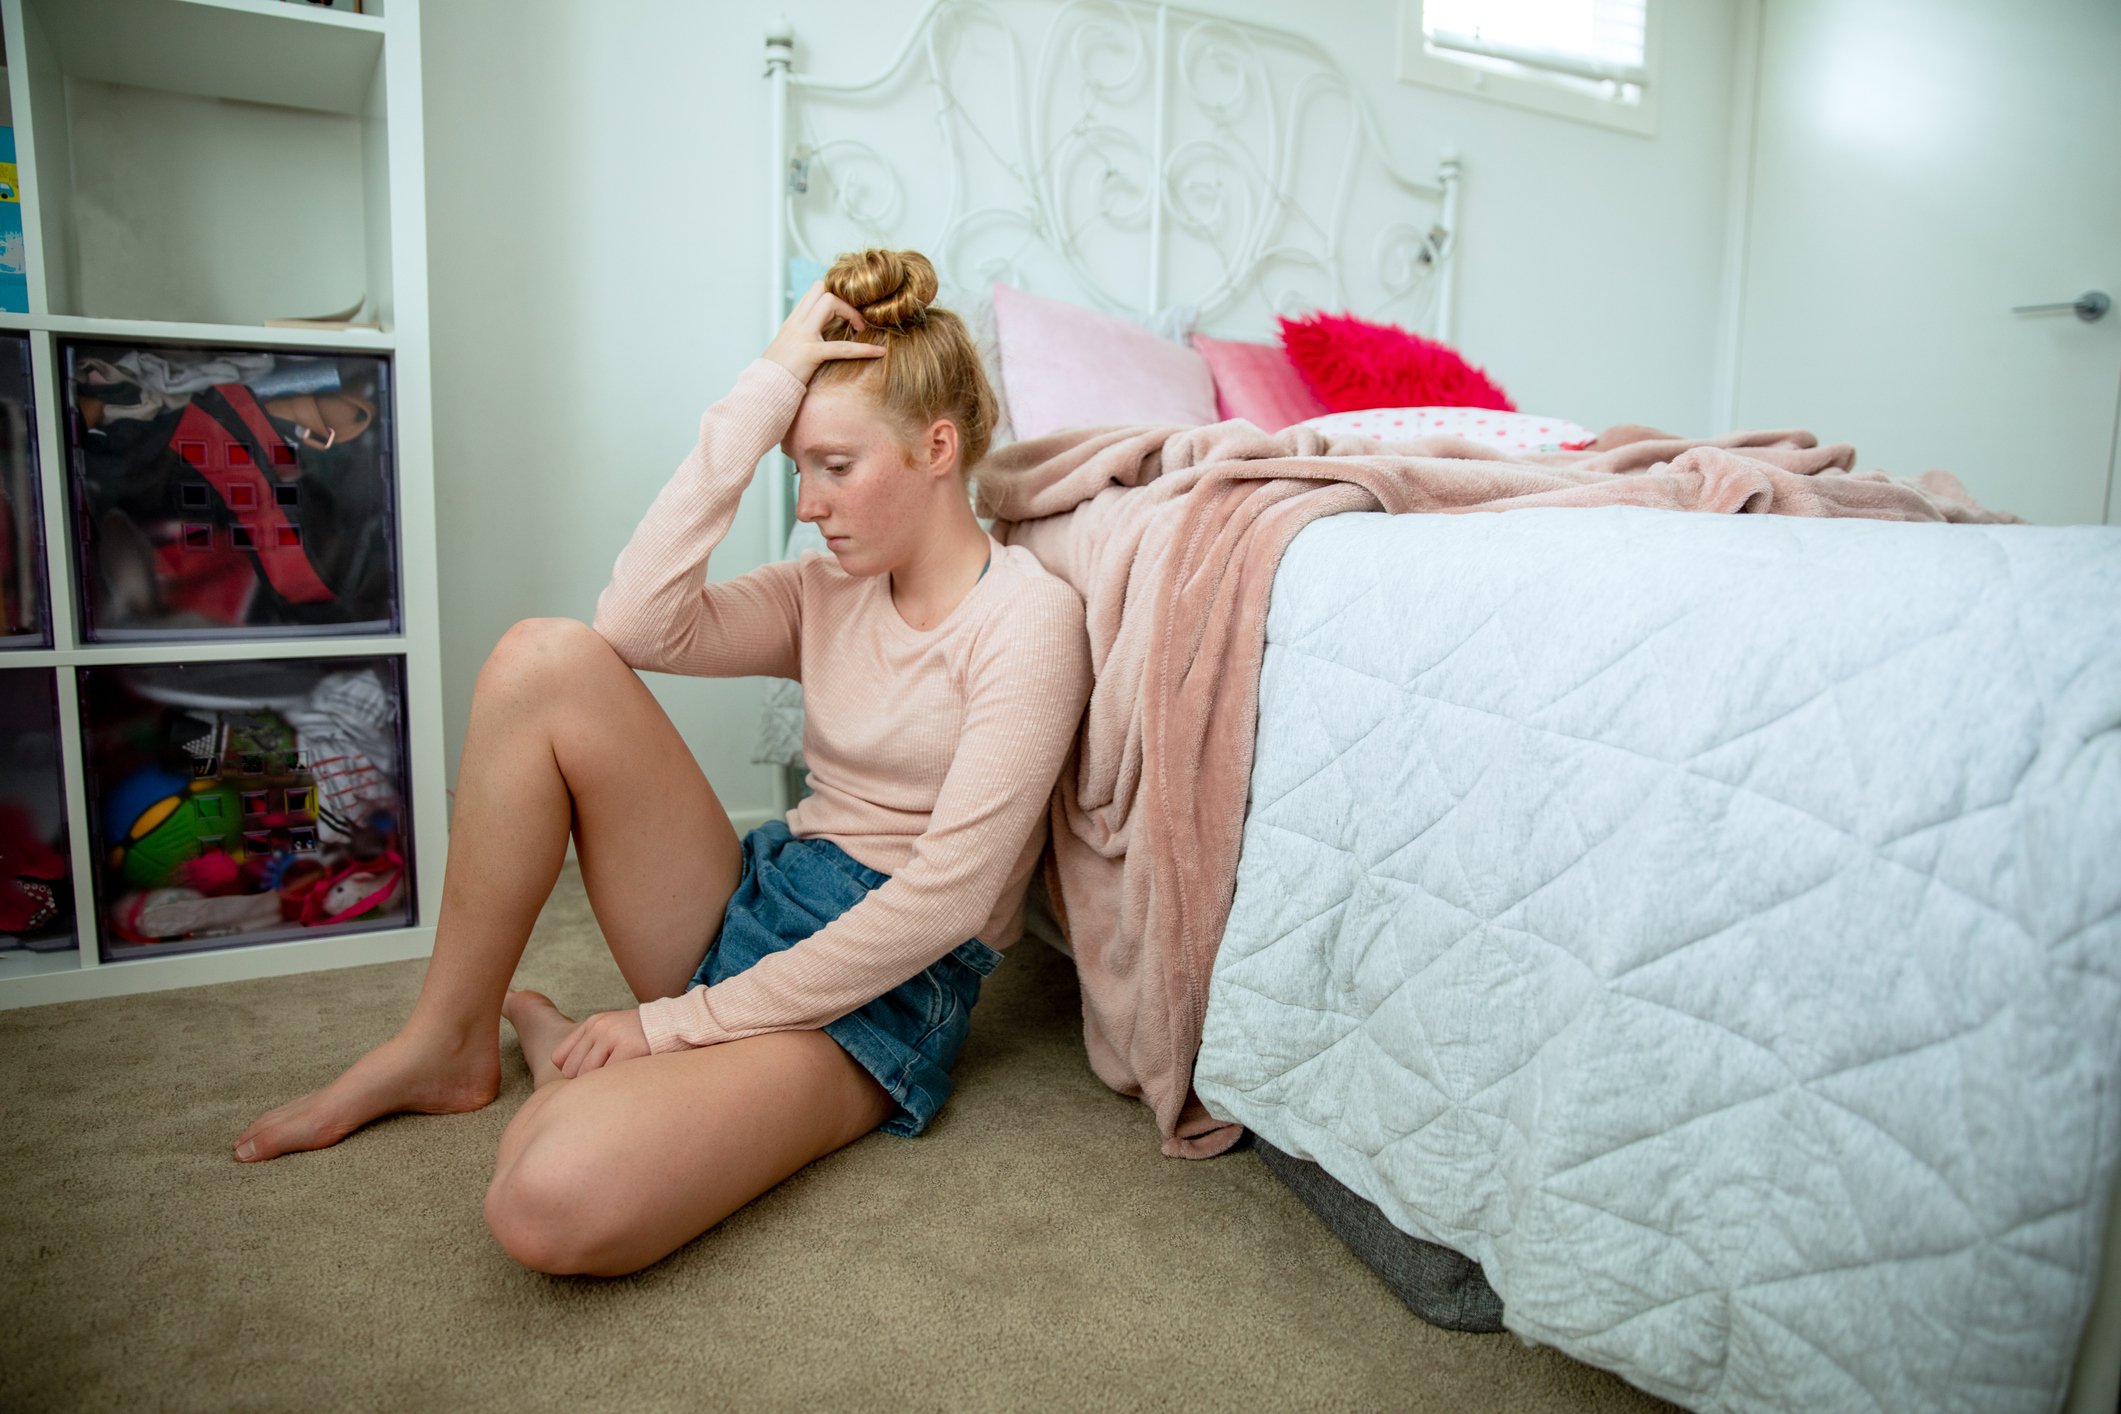 Teenage girl in her bedroom showing a range of emotions | Photo: Getty Images